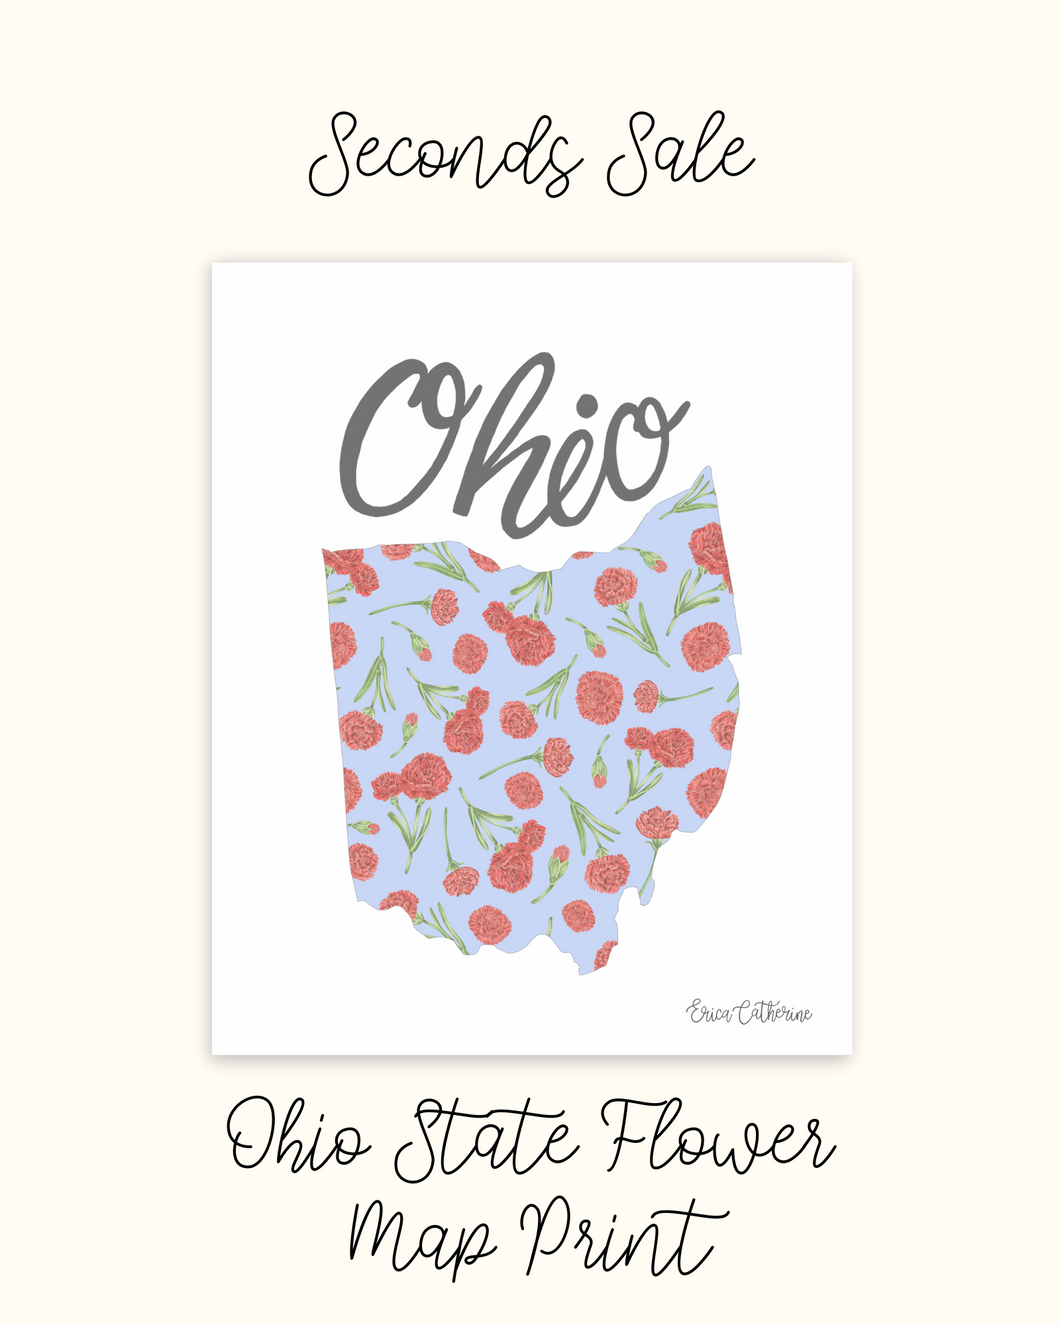 Ohio State Flower Map Print - Seconds Sale